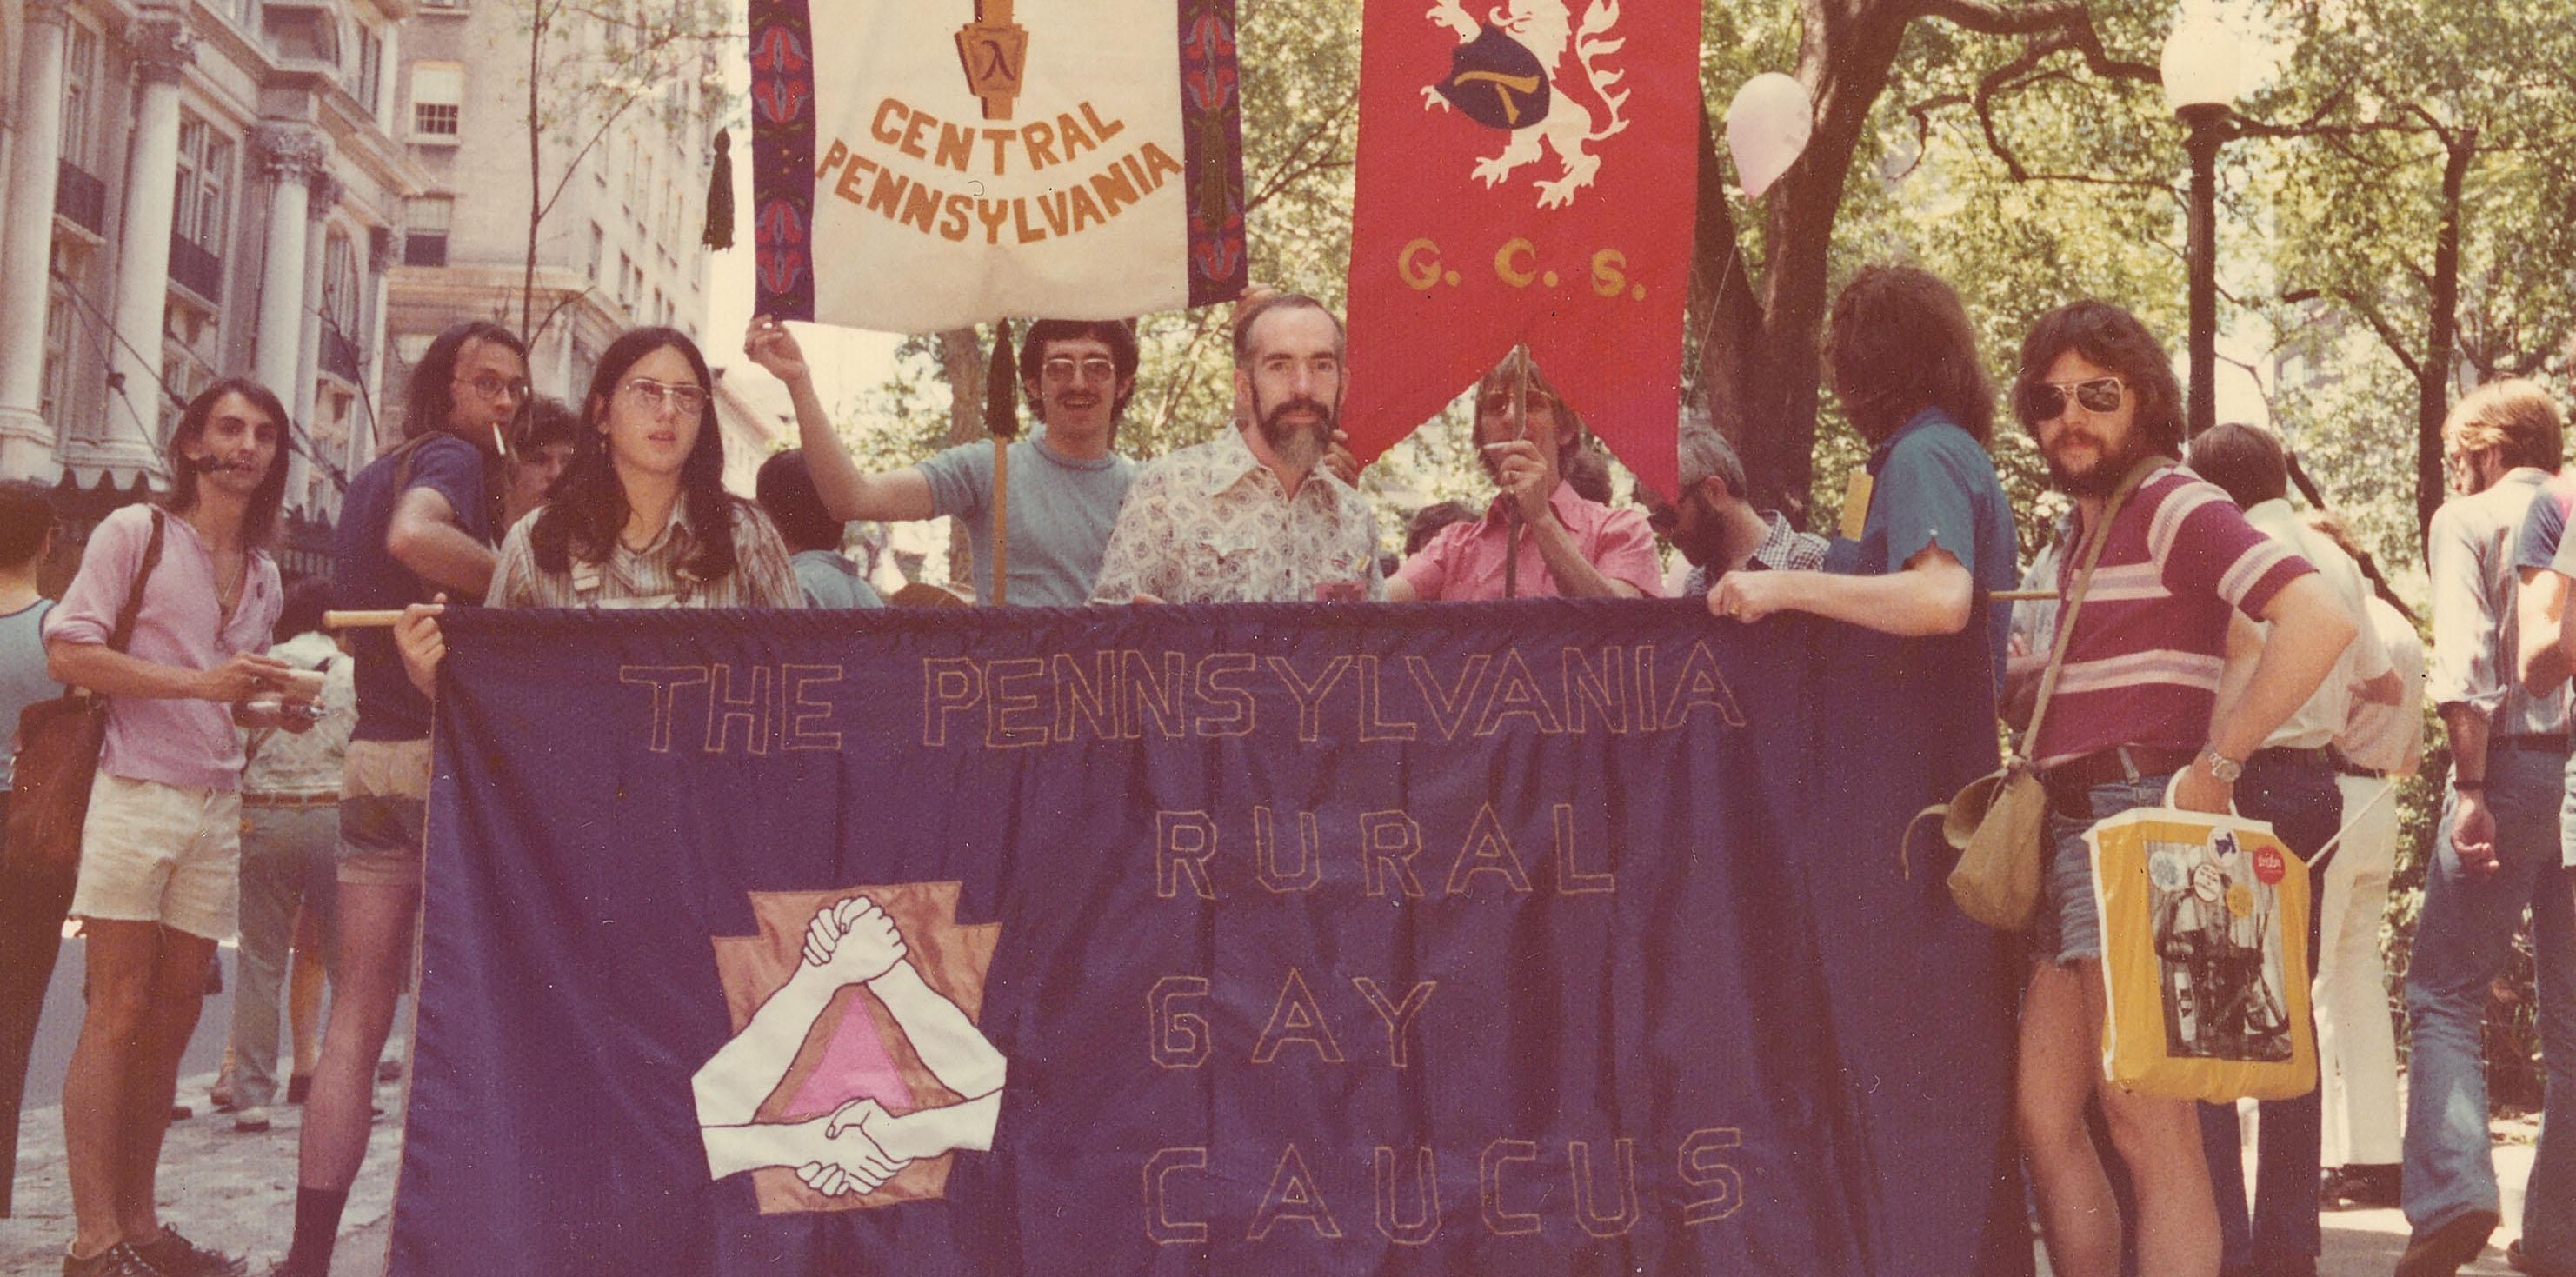 Philadelphia Pride parade attendees pose with a  "Pennsylvania Rural Gay Caucus" banner.